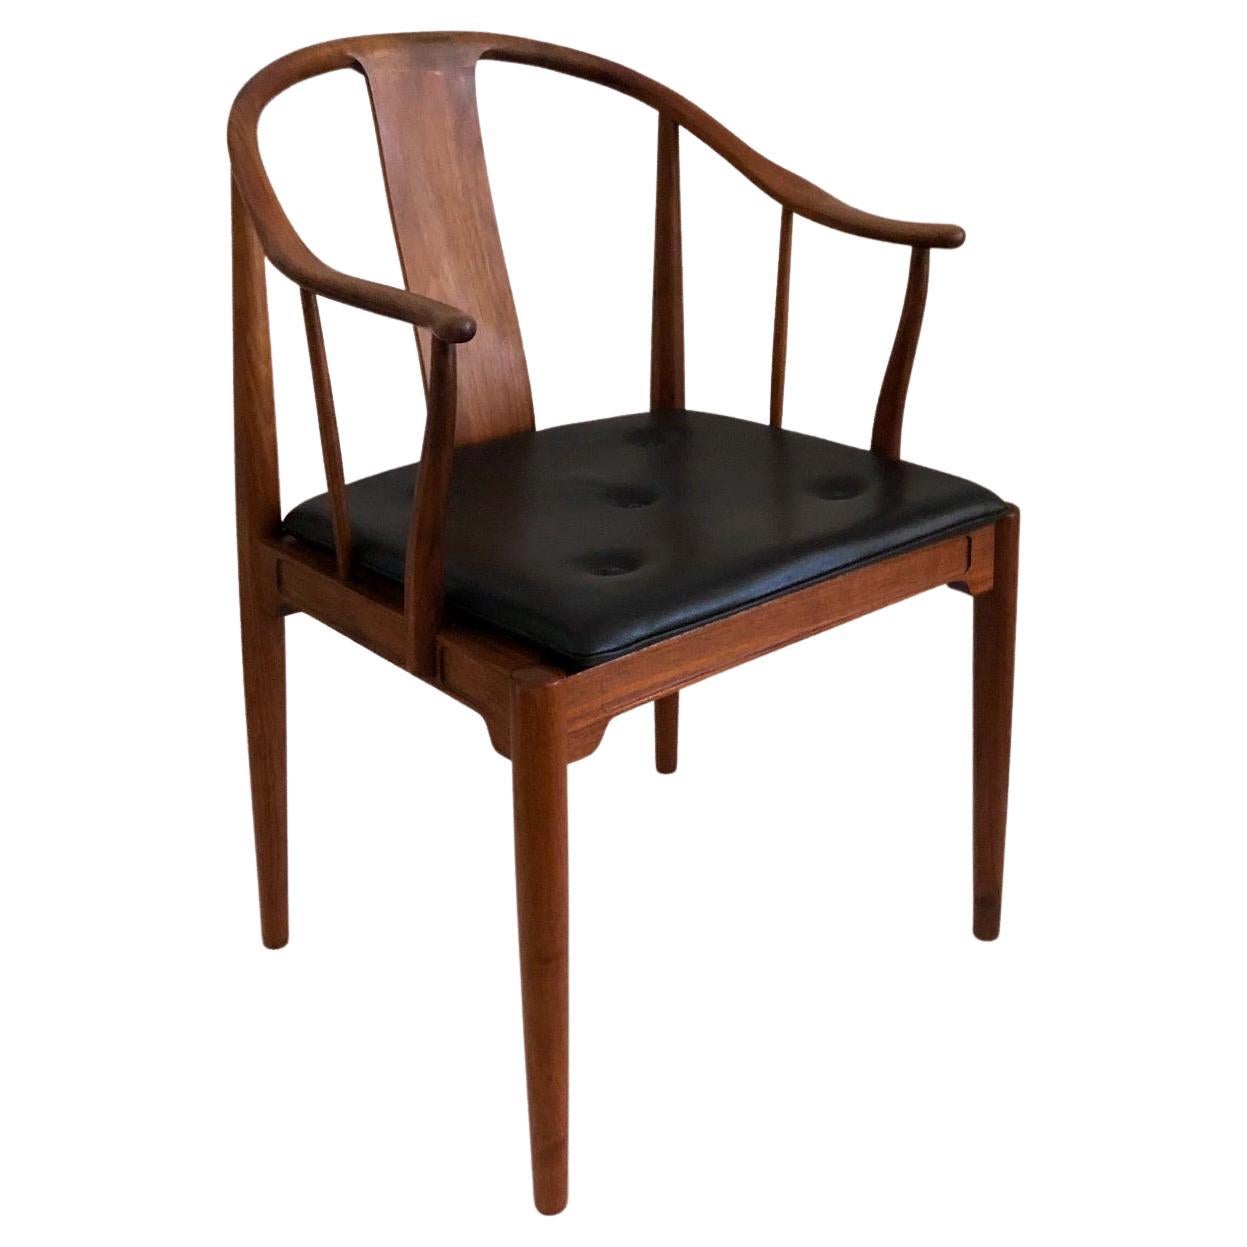 Hans J. Wegner, a 1977 Limited Edition Walnut Armchair “China Chair” For Sale